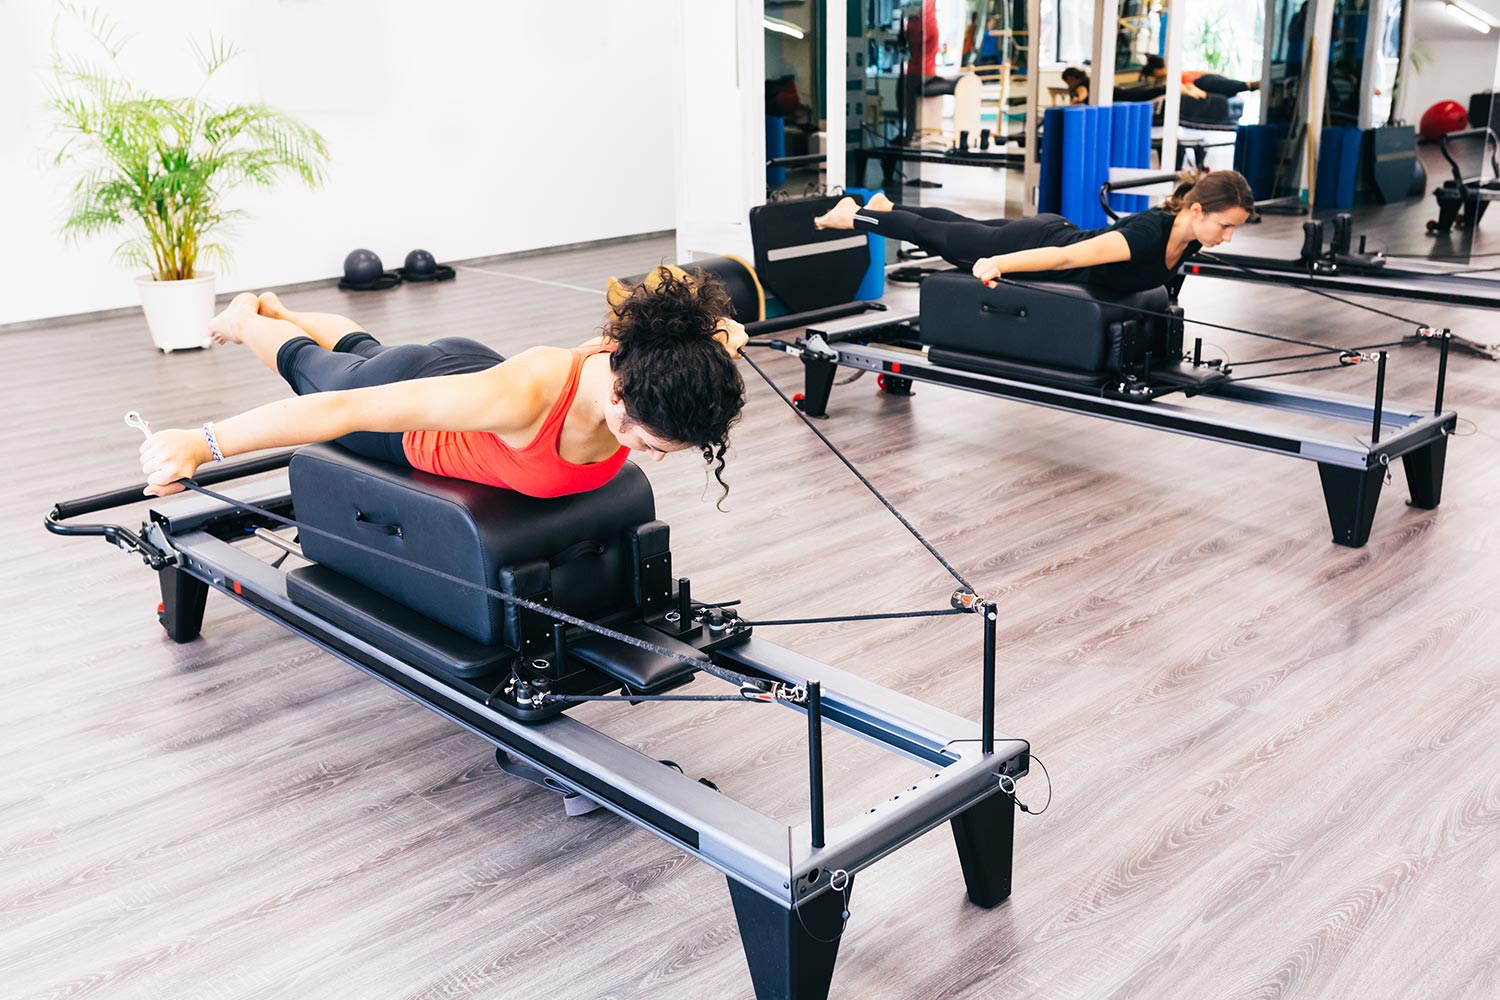 REFORMER PILATES CAN HELP ALLEVIATE BACK AND KNEE PAIN